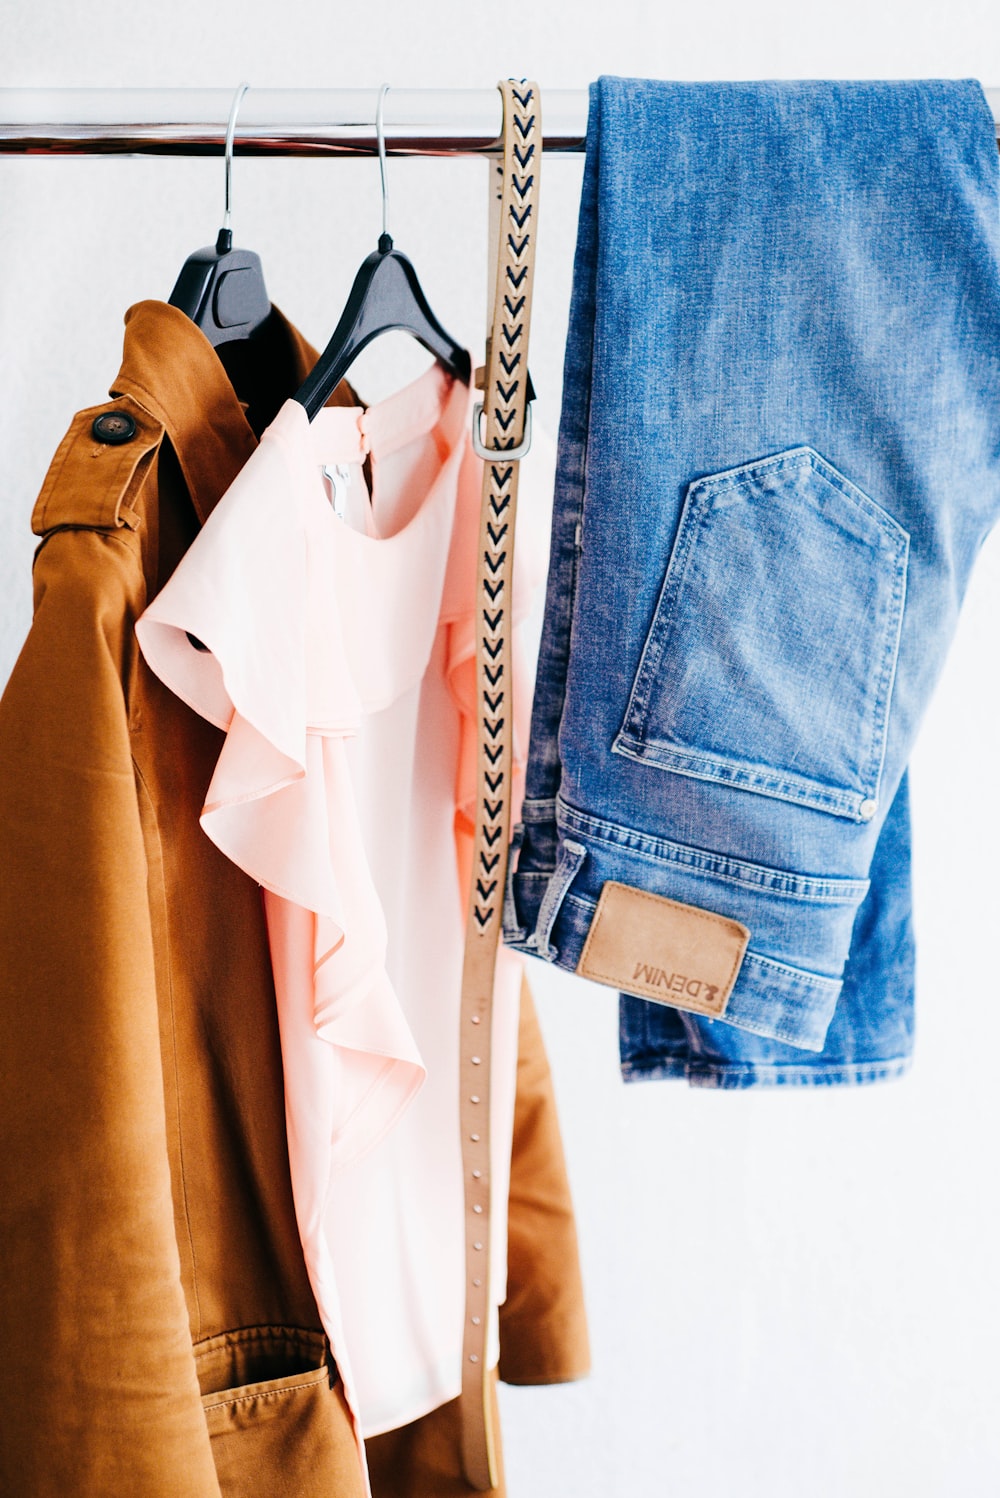 Women's shirts, jeans, and belt hanging on a clothing rack